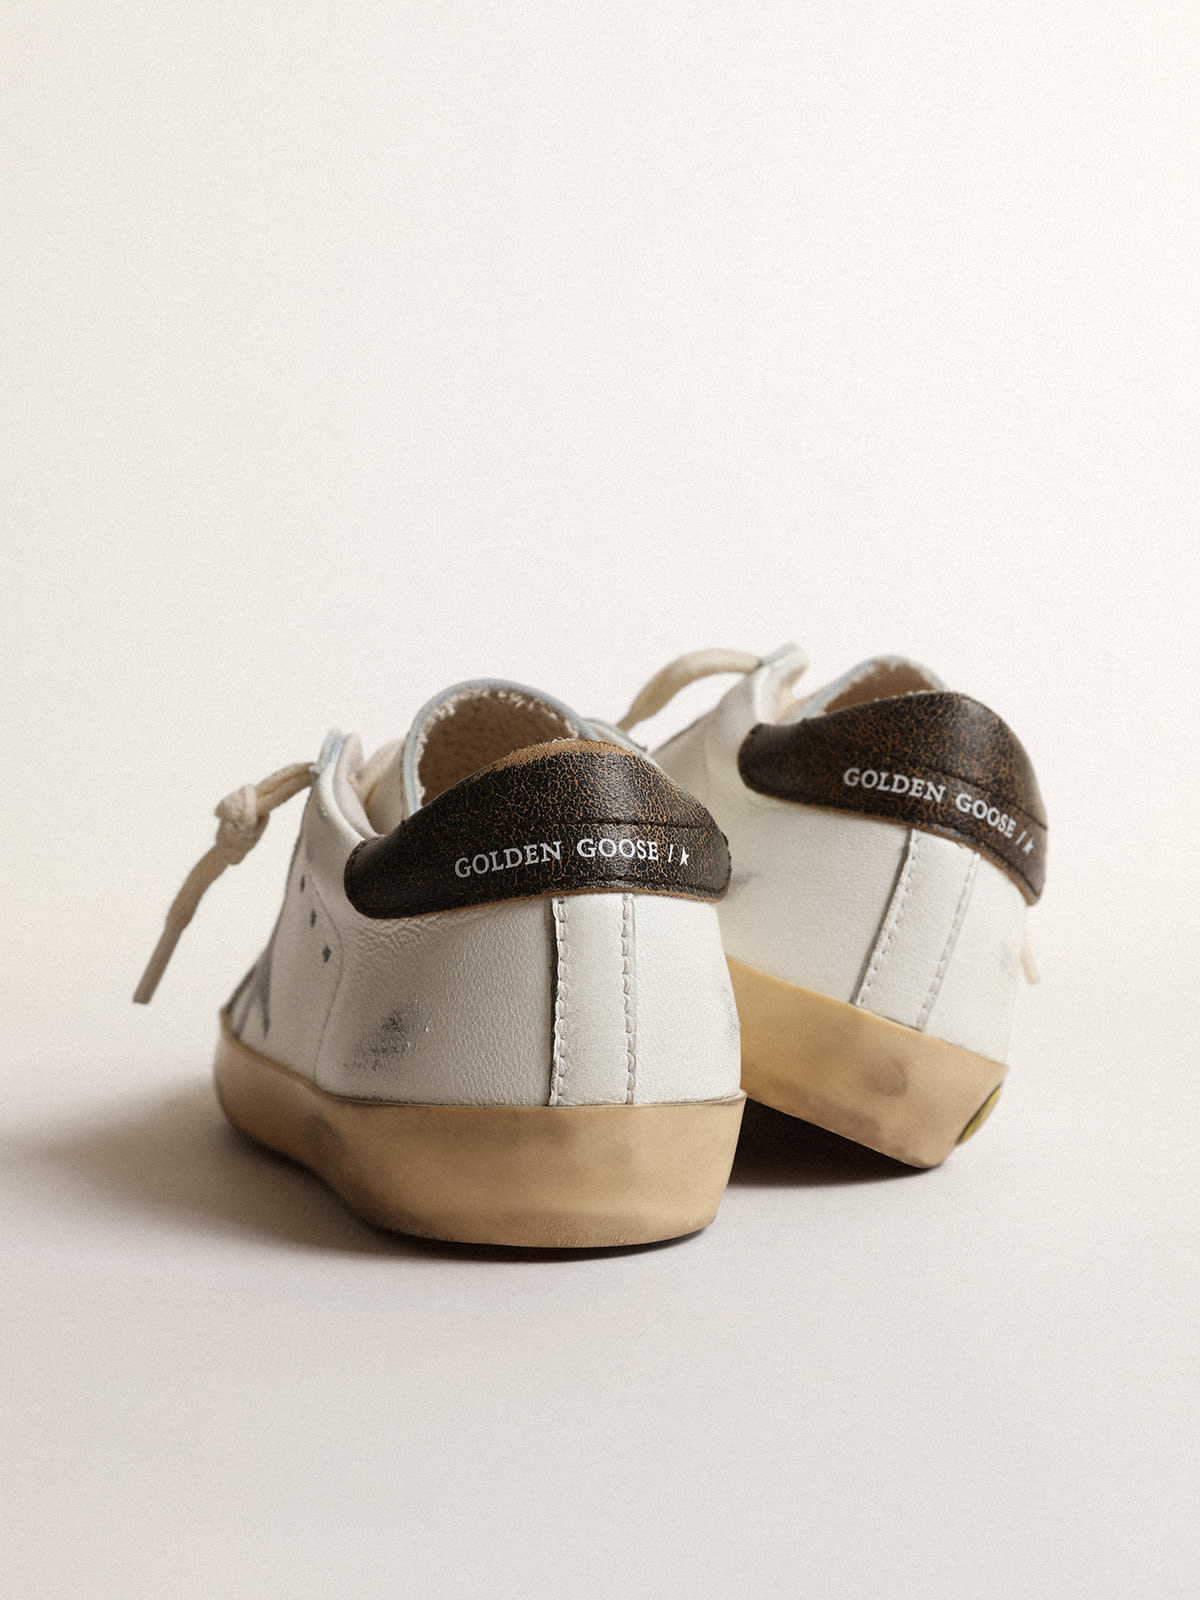 Golden Goose - Super-Star Junior in nappa with a printed star and black heel tab in 